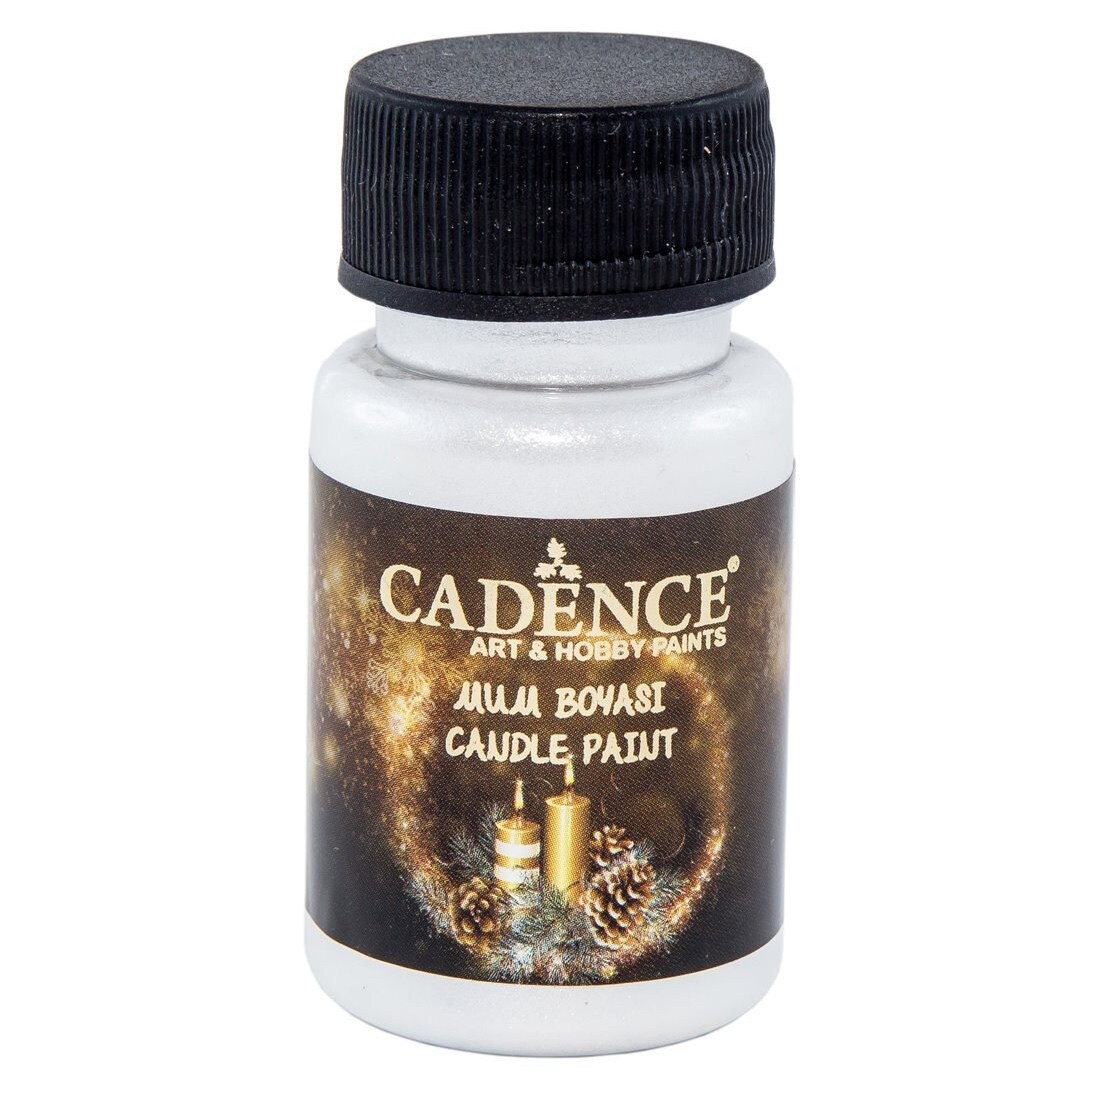 CADENCE candle paint 50 ml. - RICH GOLD 2136  Buy online fast and easy ☛【  】